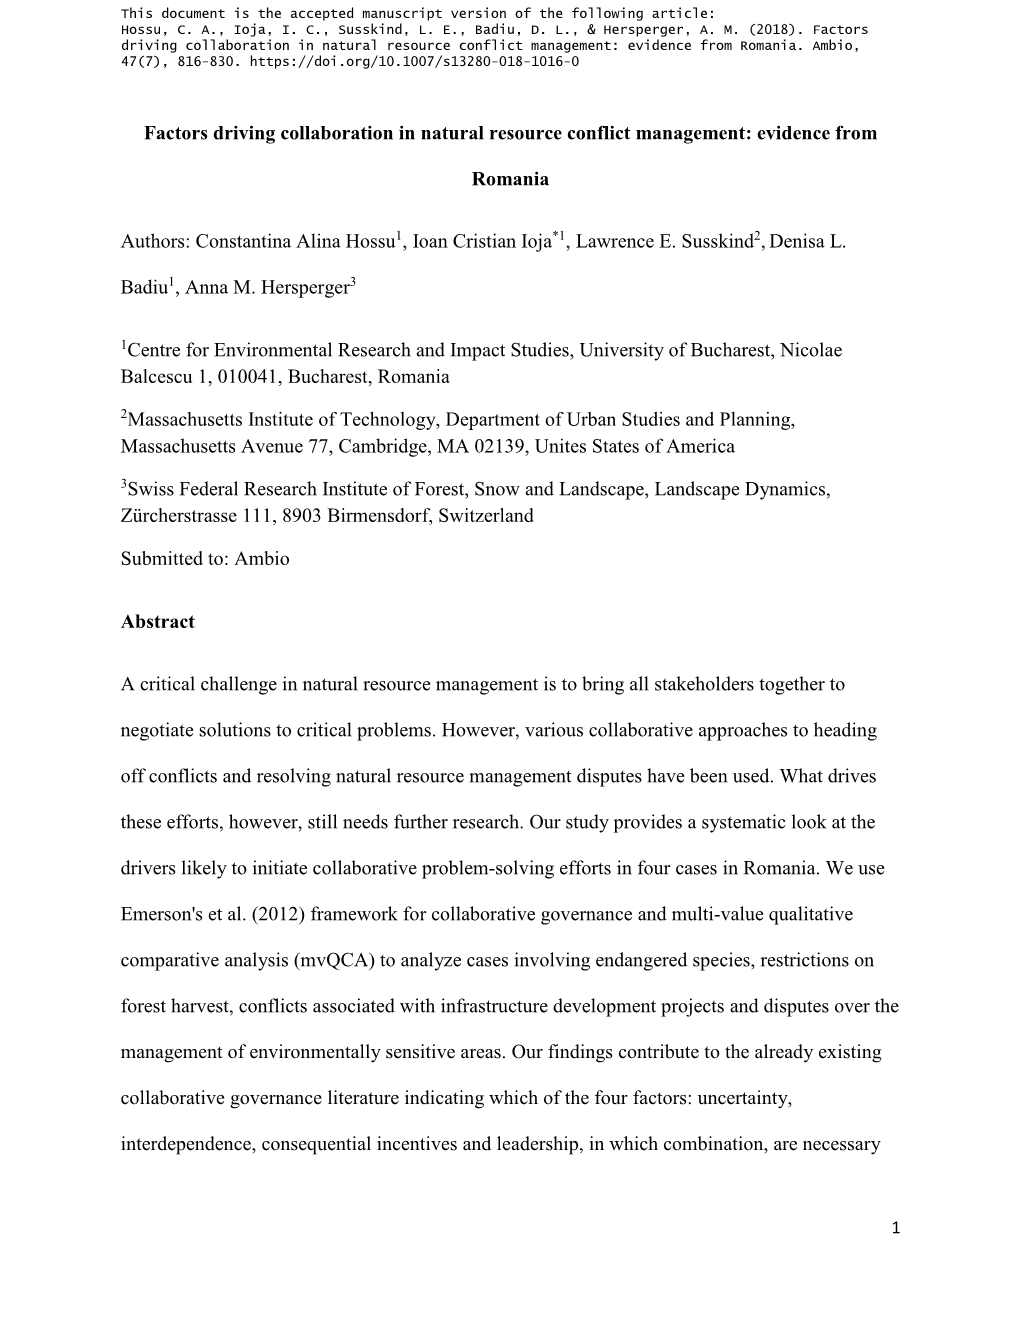 Factors Driving Collaboration in Natural Resource Conflict Management: Evidence from Romania